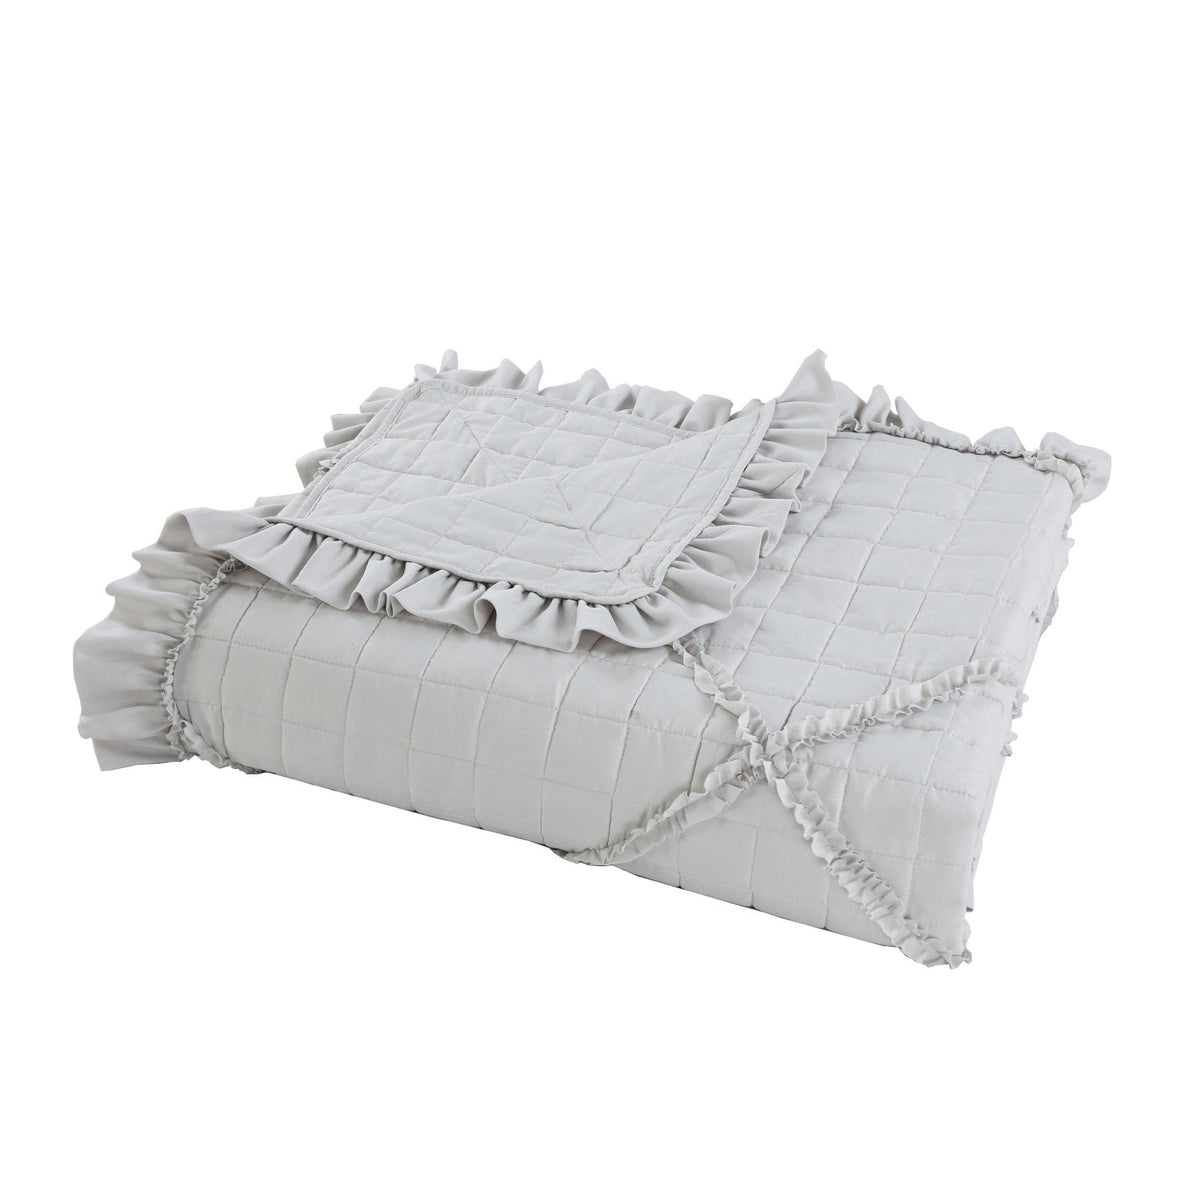 Lush Ruffled Textured Shabby Chic Embroidered Stitching Coverlet Bedspread Ultra Soft Solid 3 Piece Summer Quilt Set with 2 Quilted Shams, Light Grey